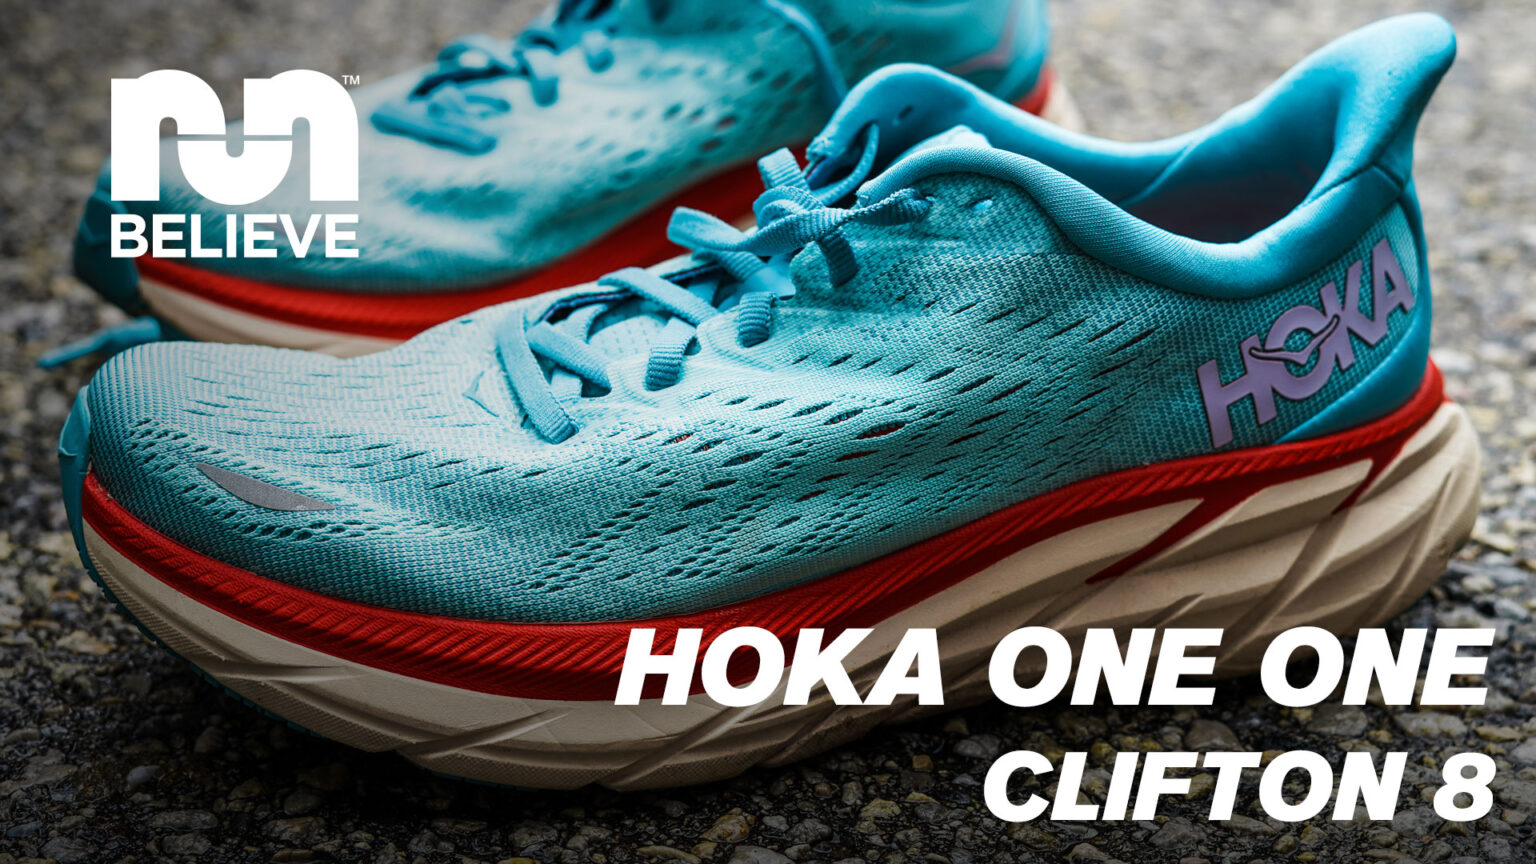 Hoka One One Clifton 8 Video Review » Believe in the Run